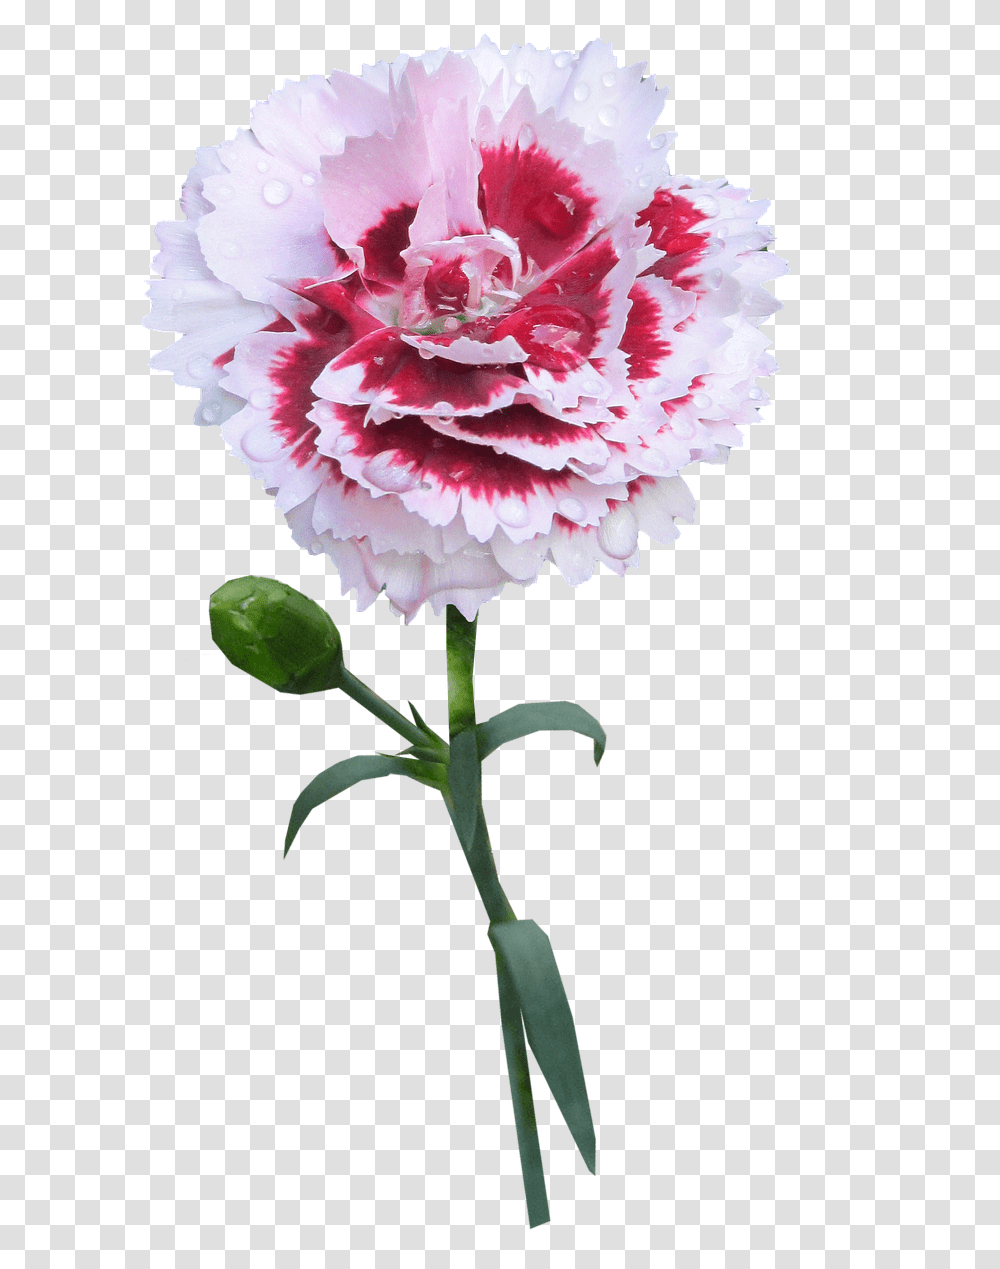 Flower Stems Picture Flowers With Stem No Background, Plant, Blossom, Carnation Transparent Png